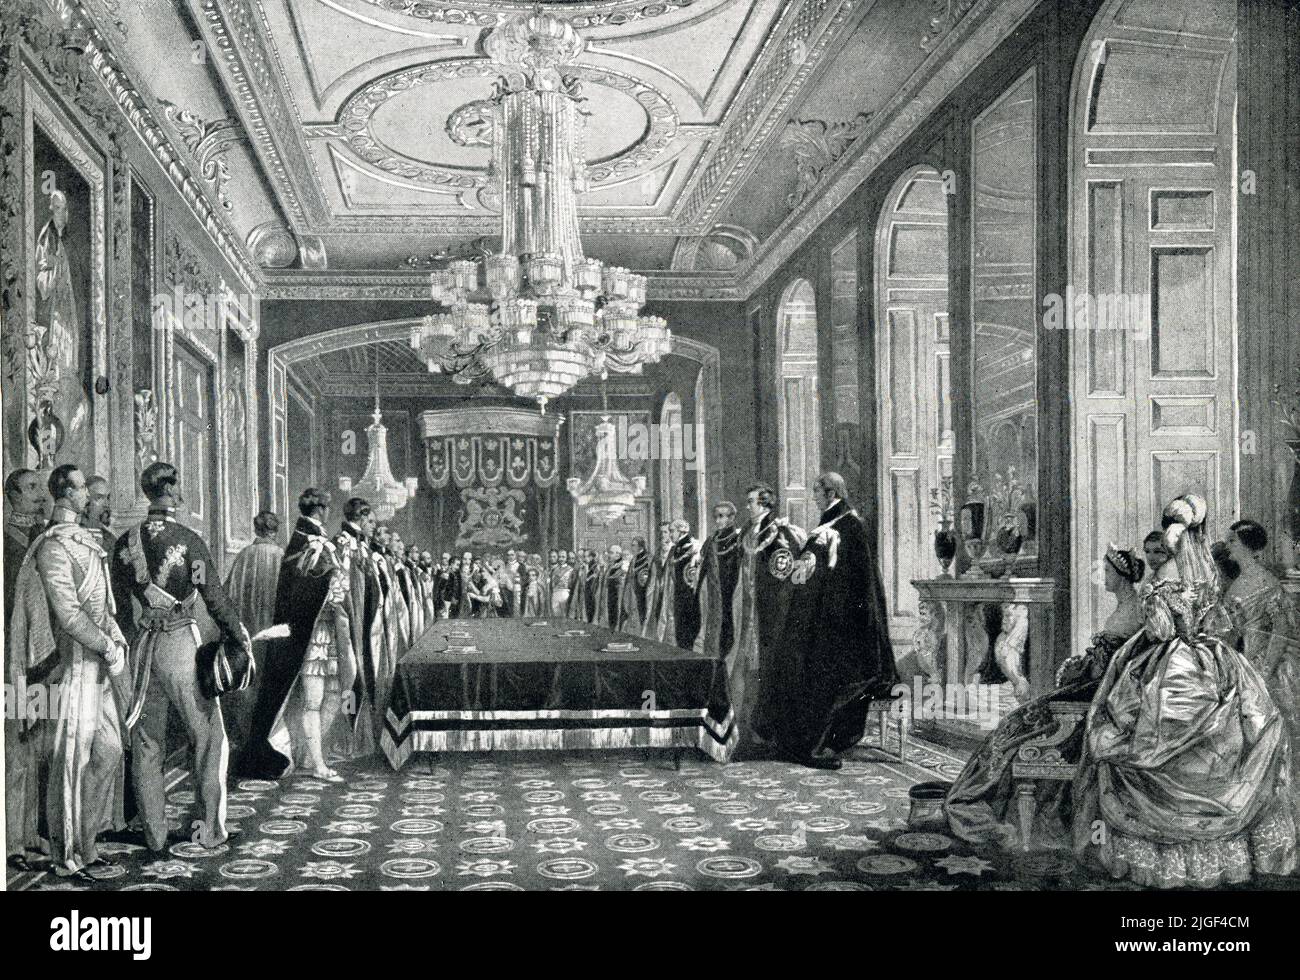 Windsor Castle Interior, Throne Room - Order of the Garter ceremony event 19th Century Illustration - England Stock Photo